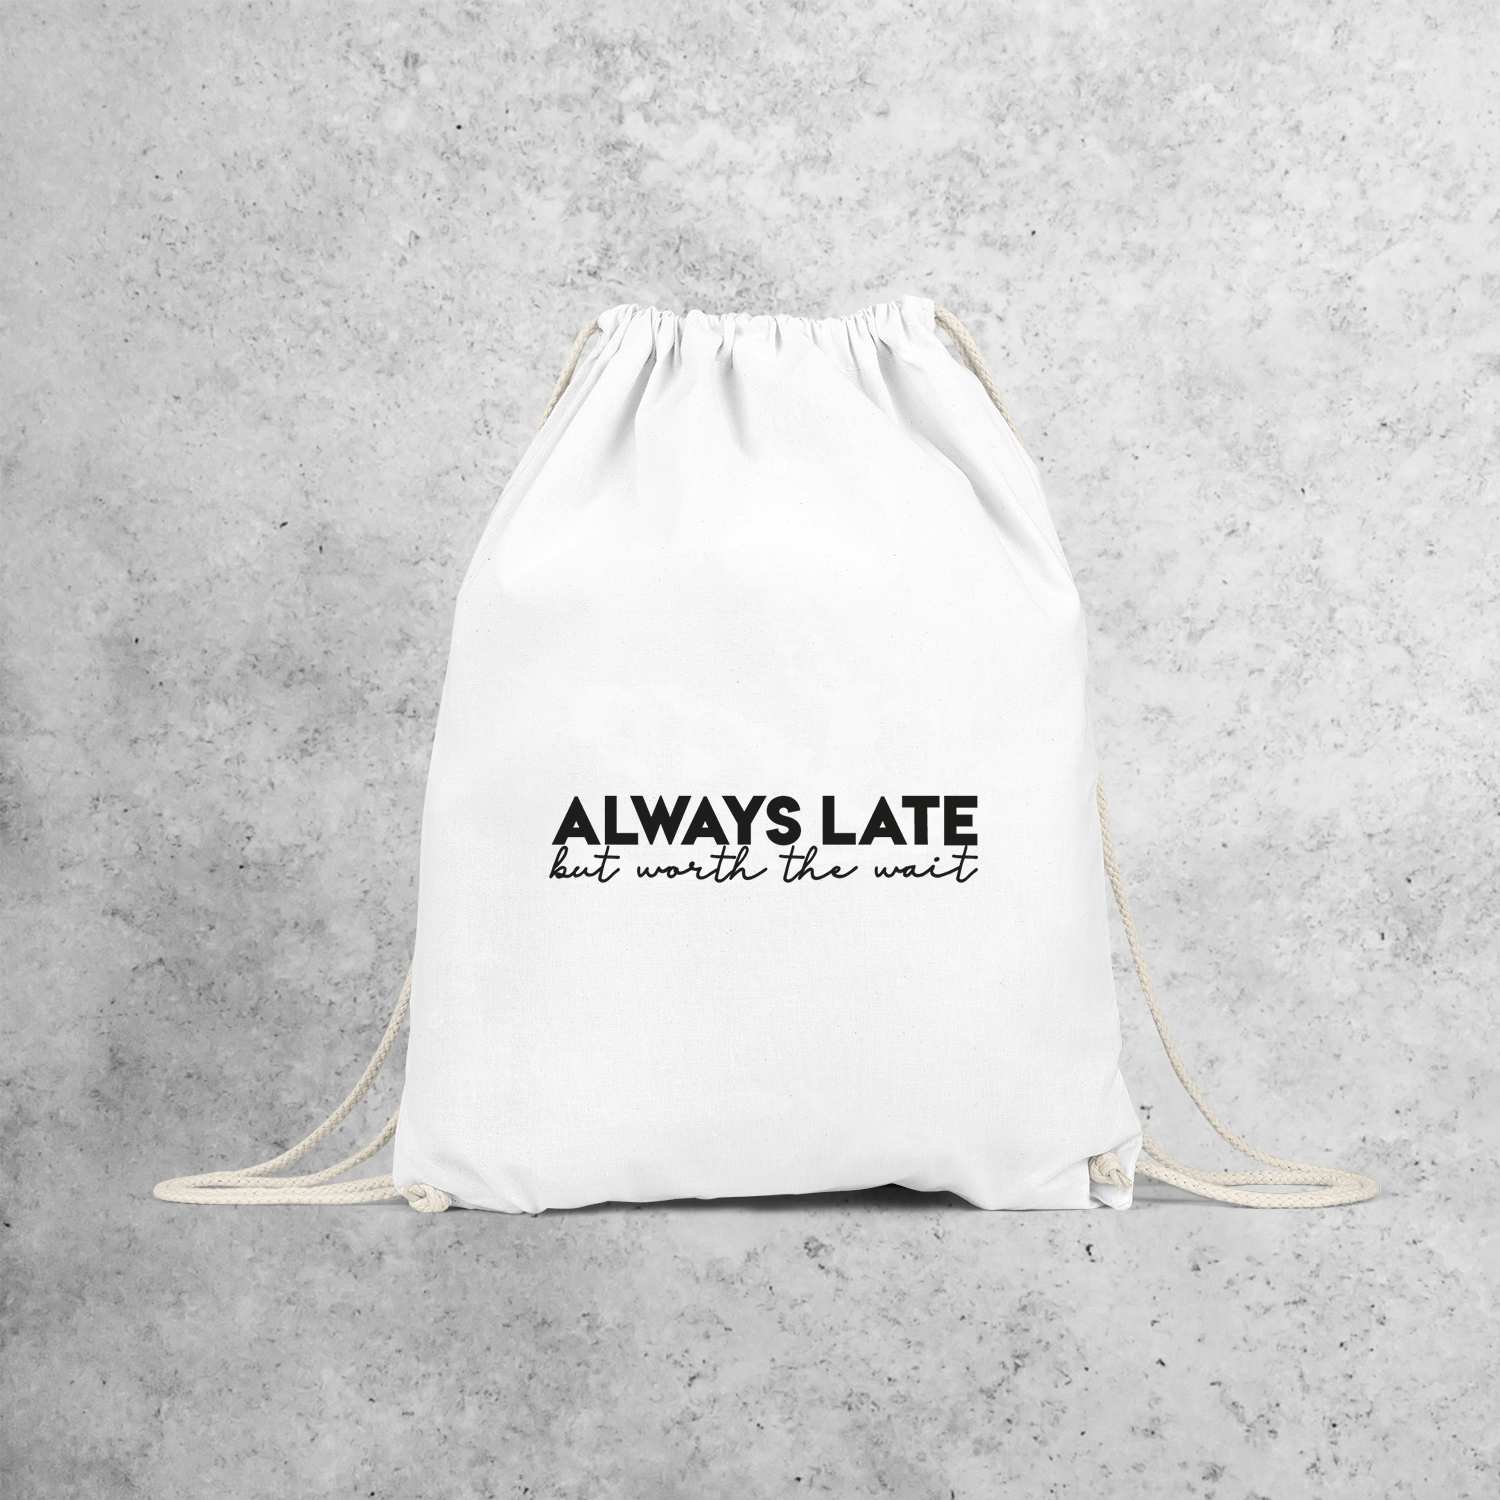 'Always late, but worth the wait' backpack